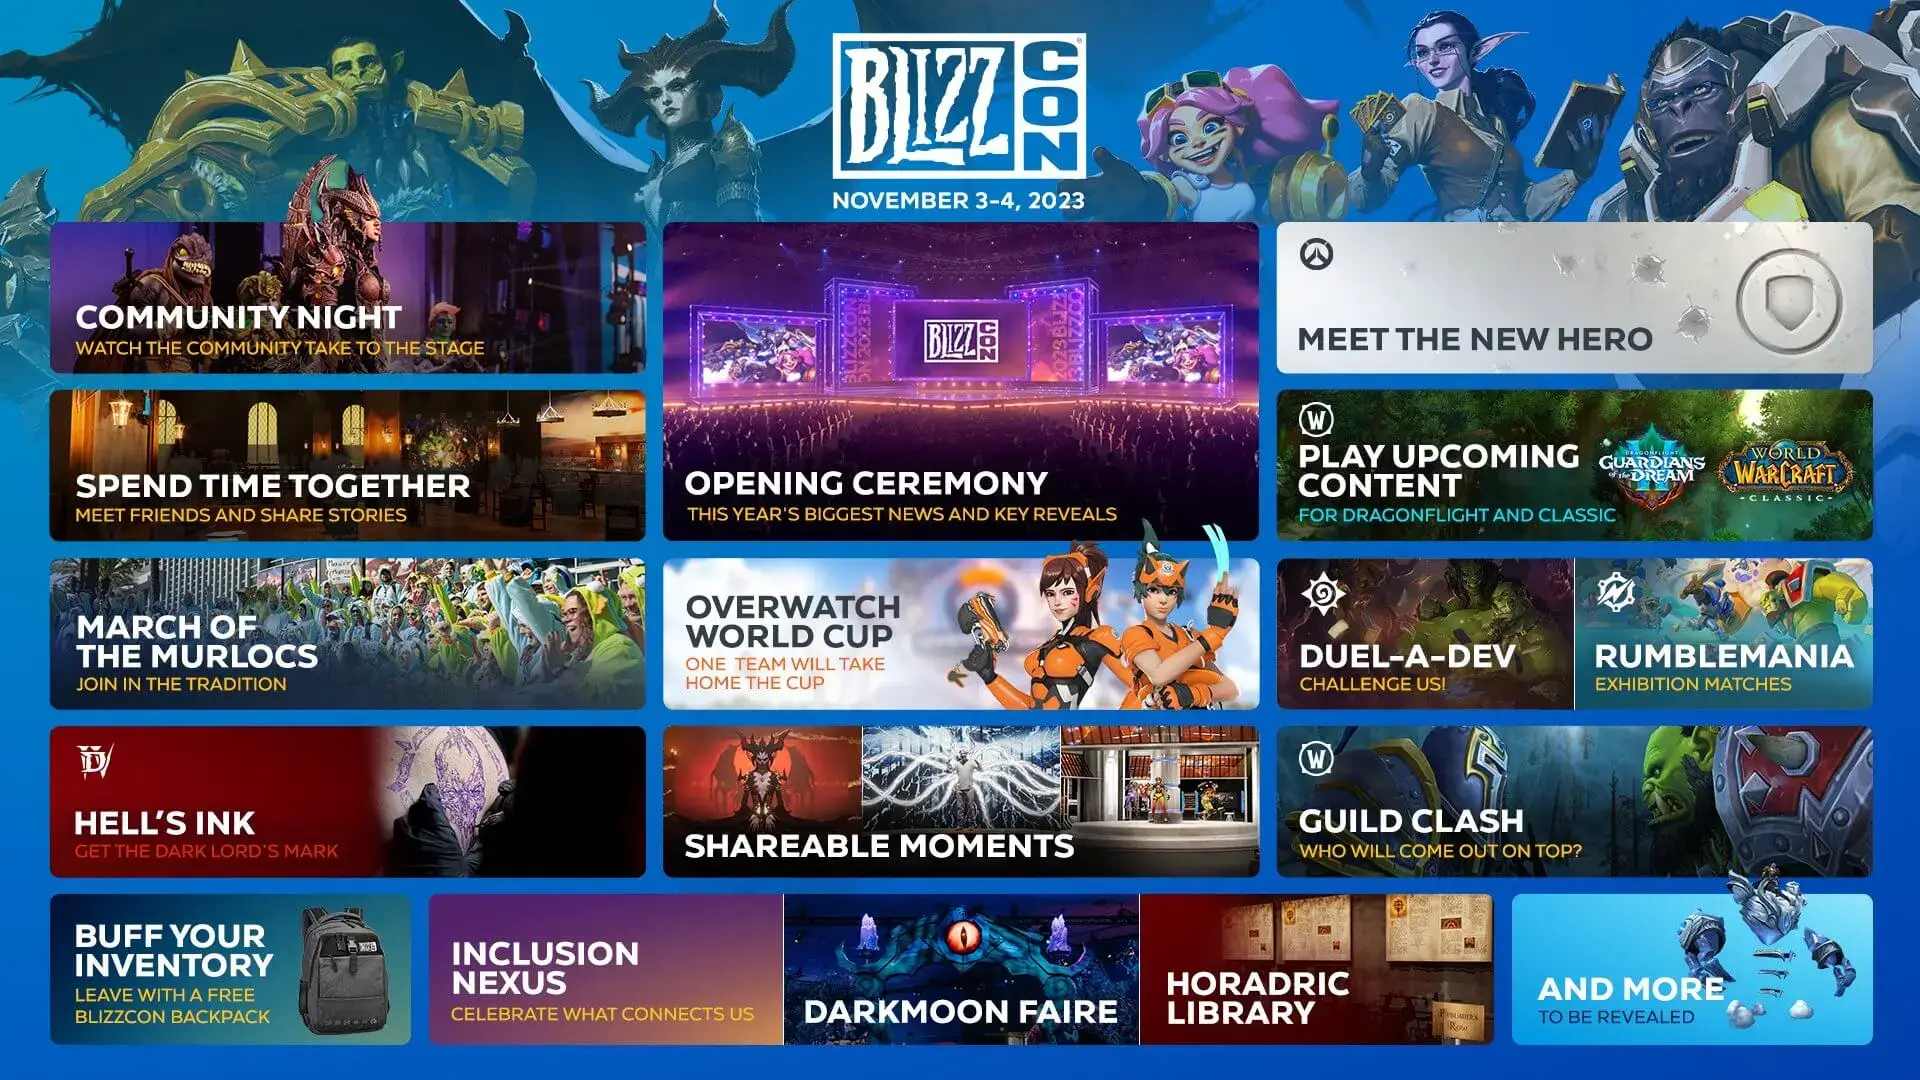 BlizzCon 2023 schedule and map with events like Overwatch tournament, WoW exhibit, panels, costume contest and gaming areas highlighted